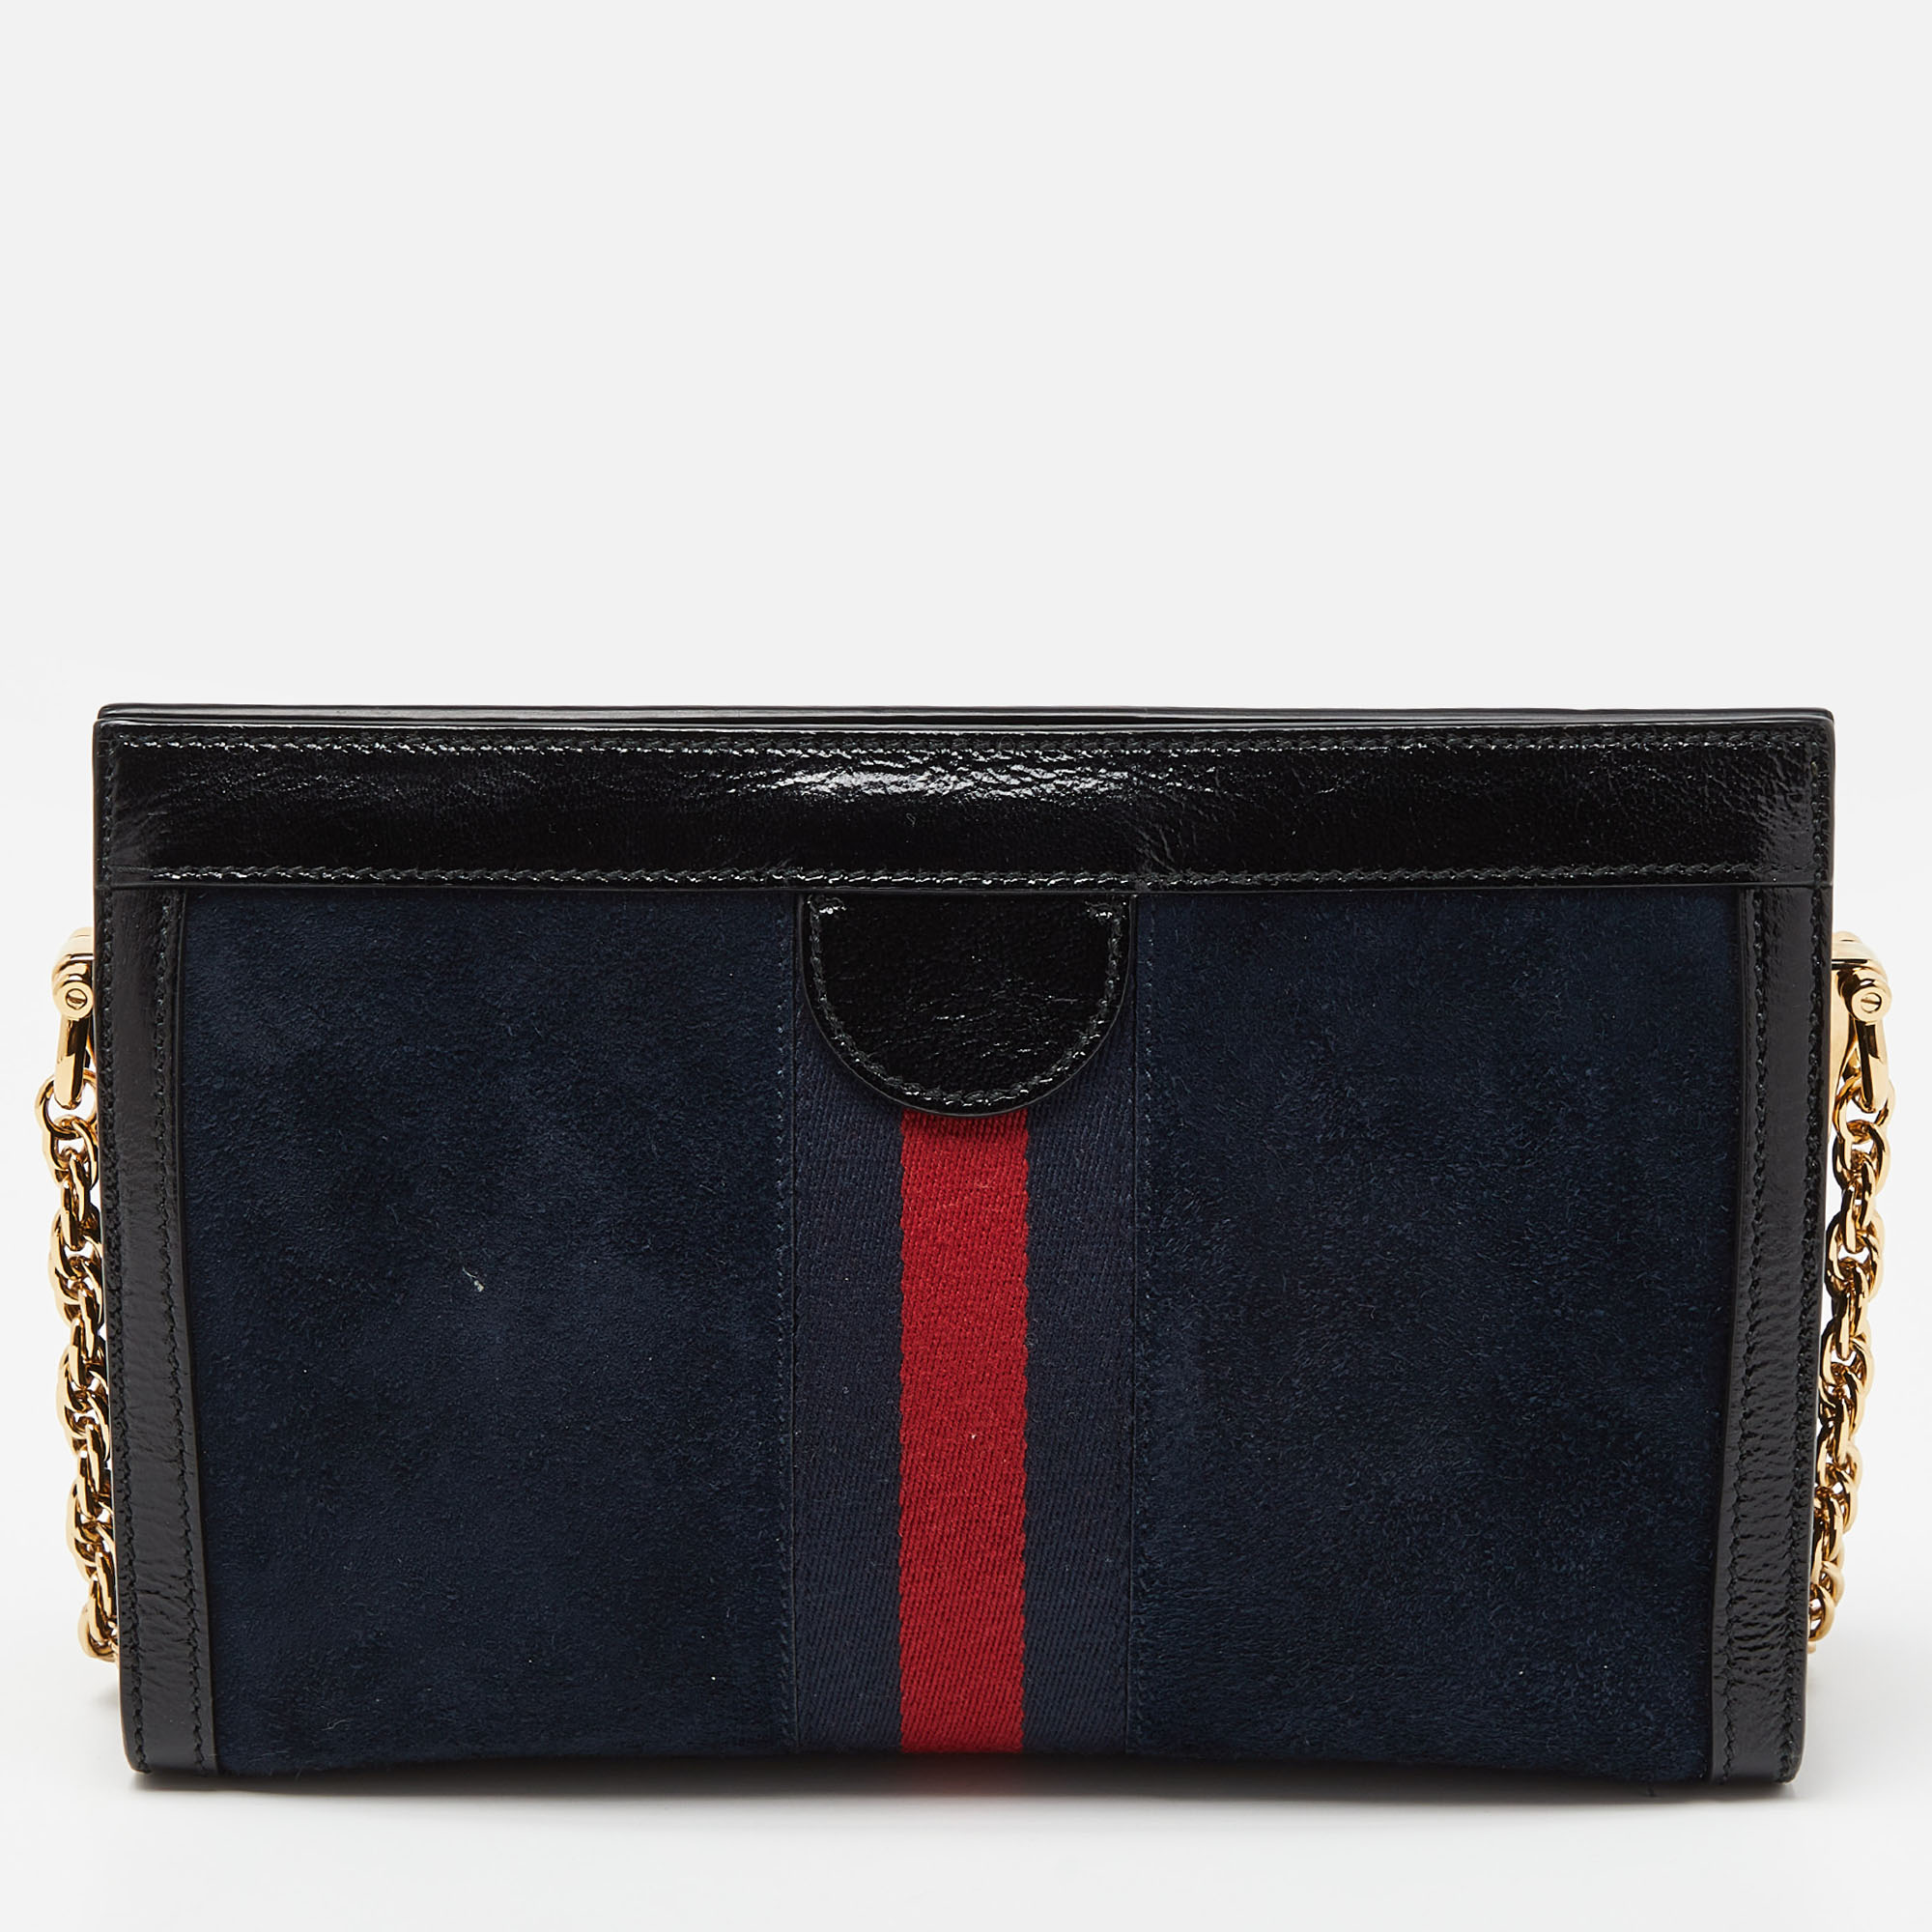 Gucci Blue/Black Suede AndLeather Ophidia Chain Bag